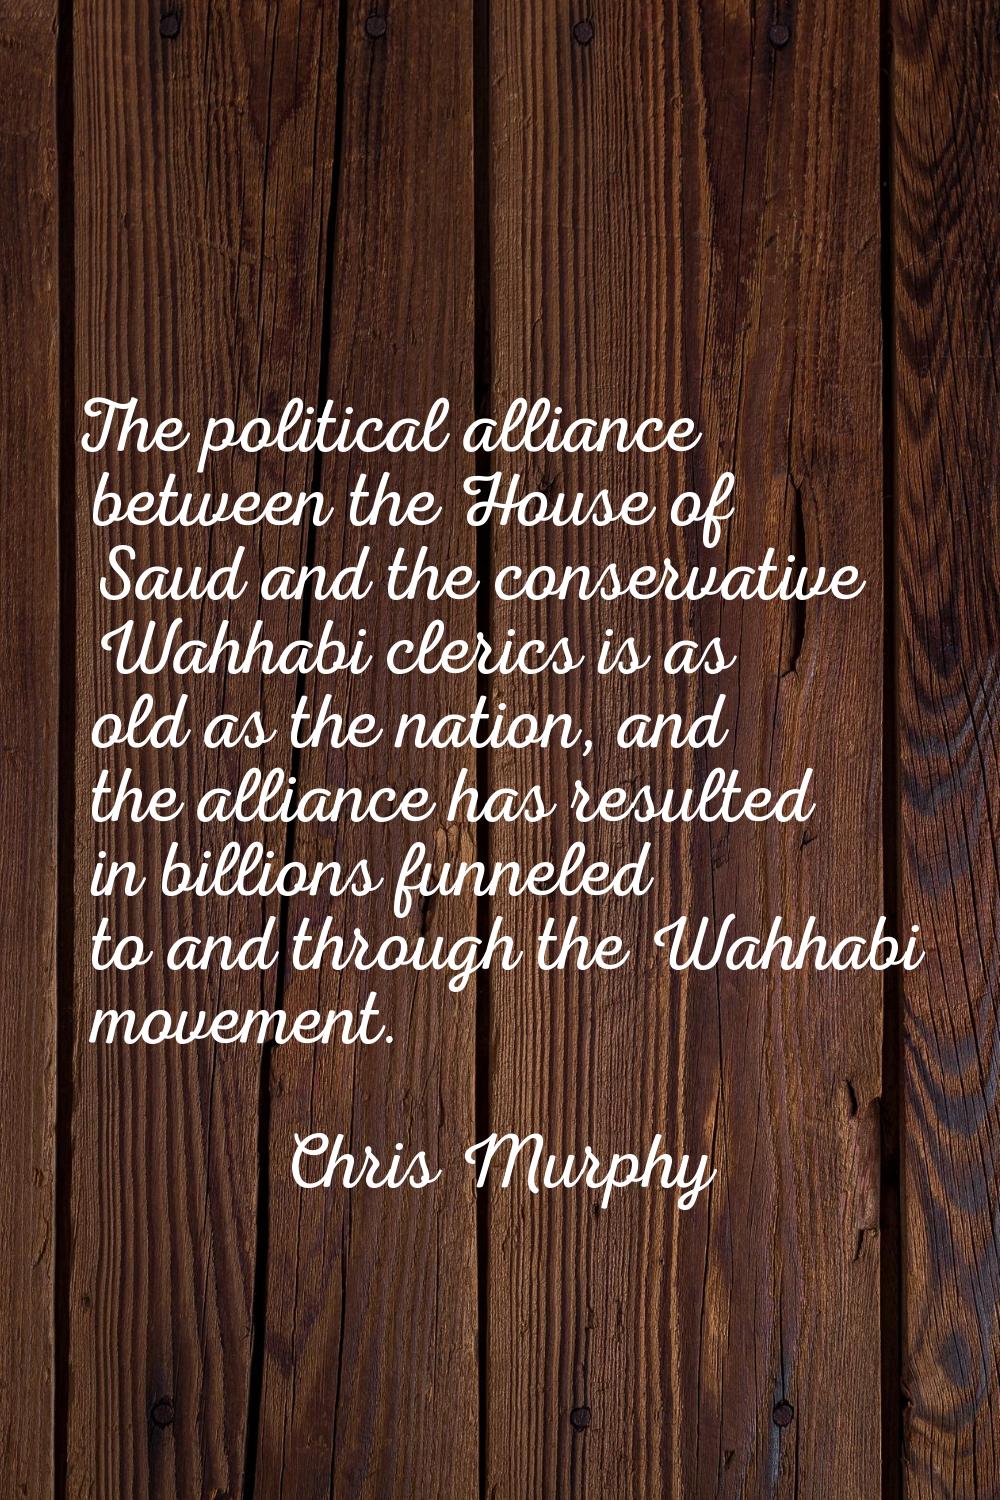 The political alliance between the House of Saud and the conservative Wahhabi clerics is as old as 